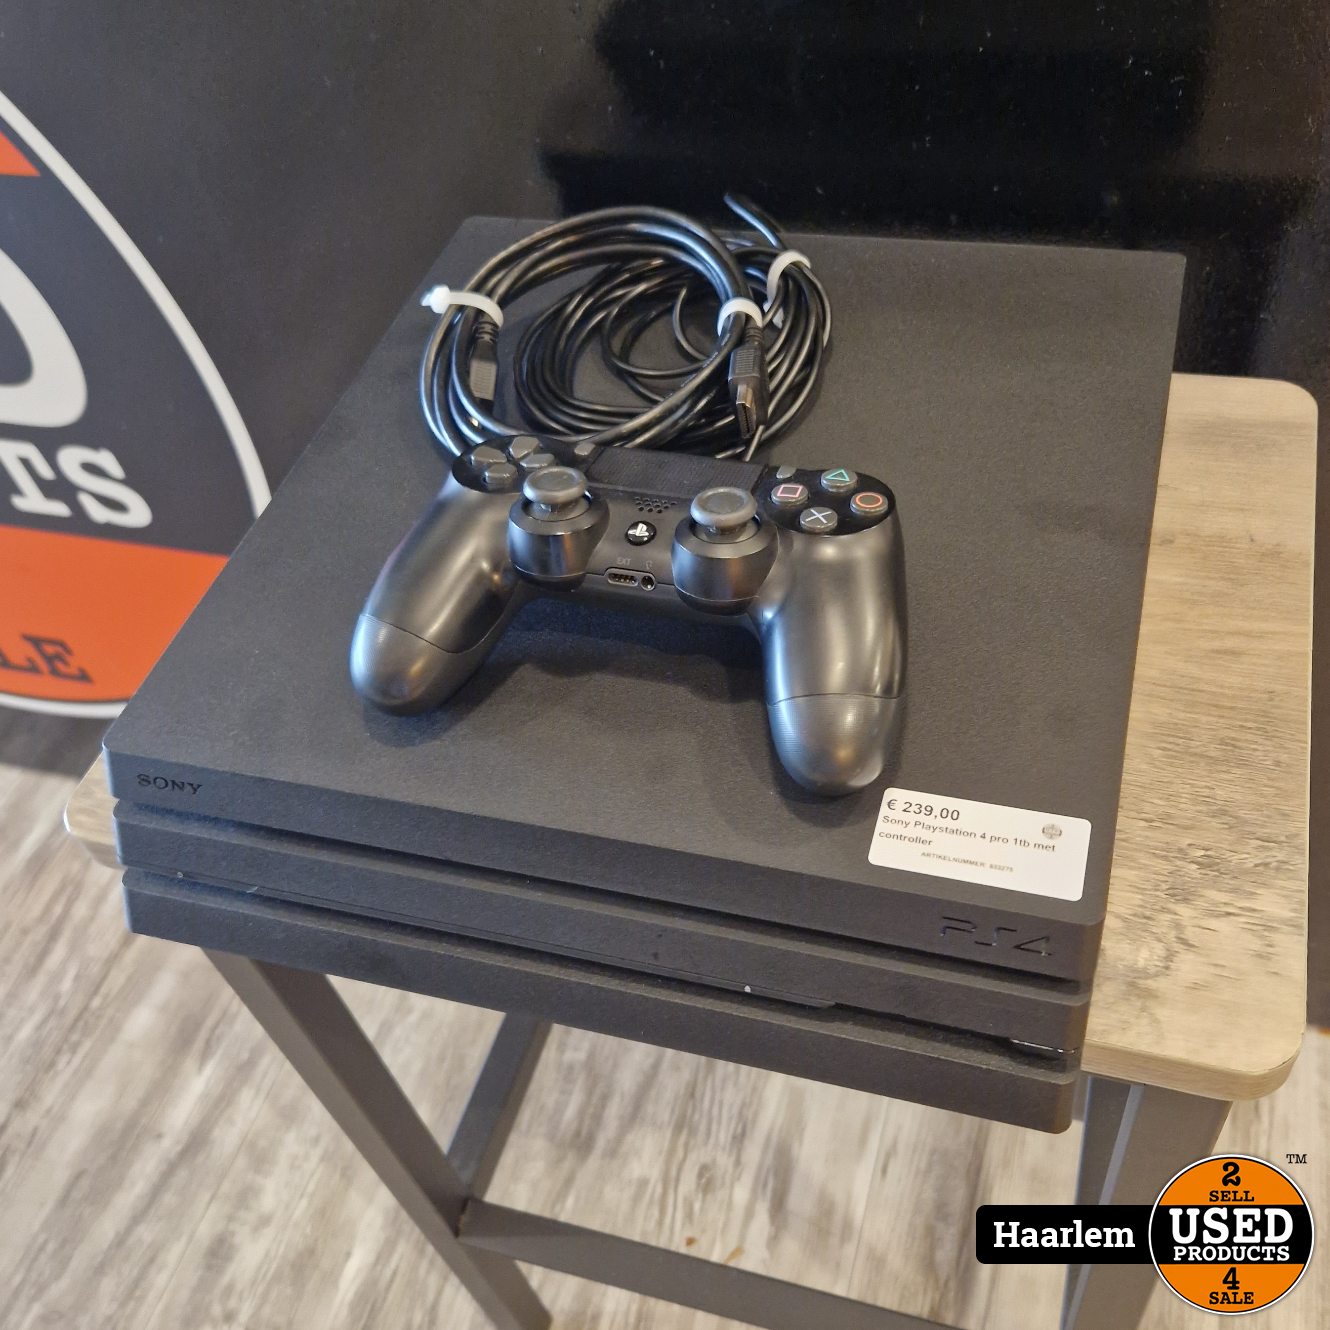 Sony Playstation 4 pro 1tb met controller - Used Products Haarlem Cronjéstraat